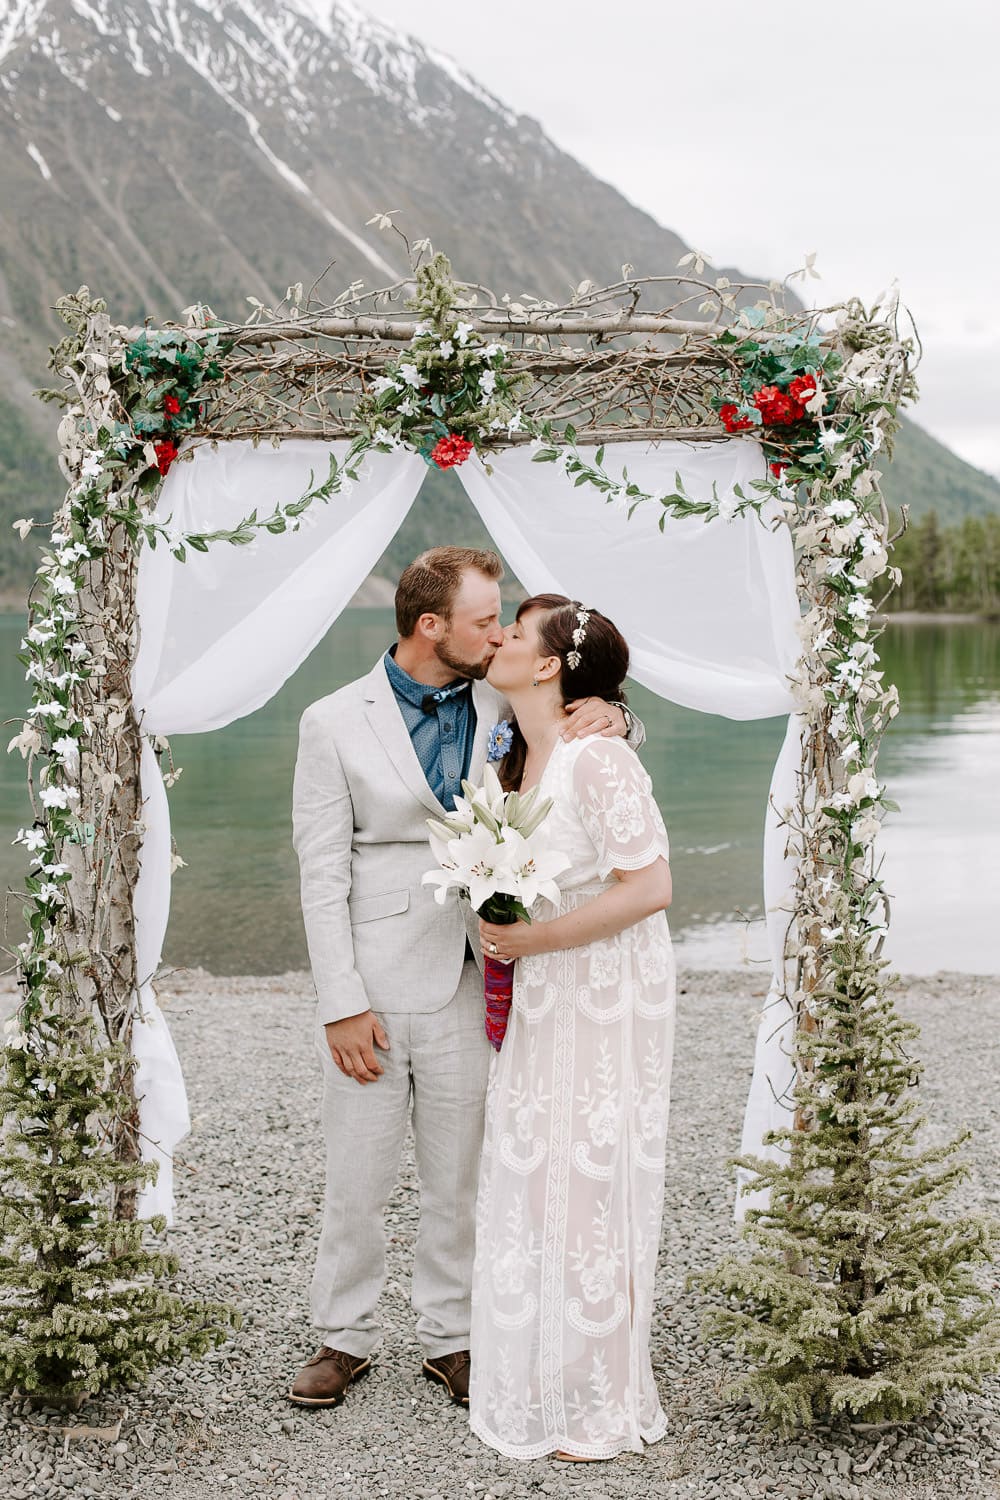 A couple having their first kiss under a flower arch in front of a glacier lake. Destination wedding photographer.